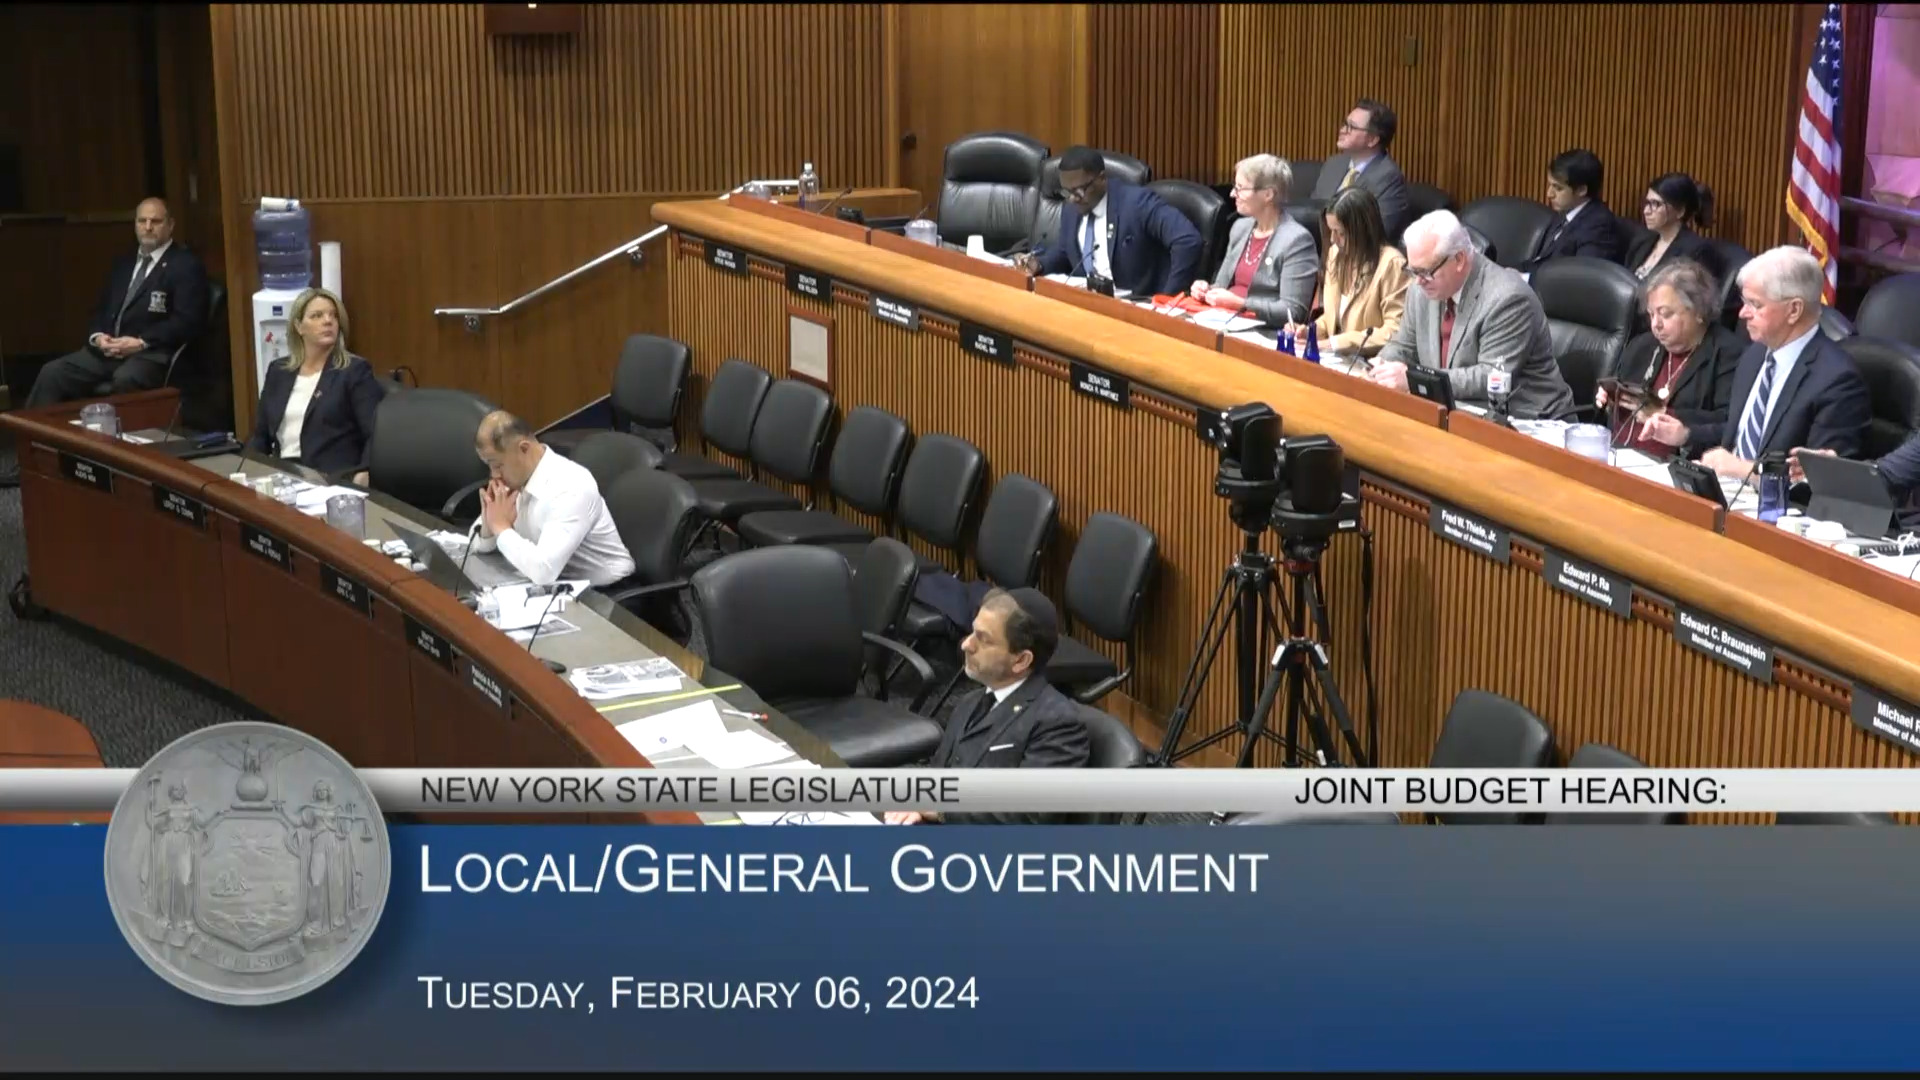 Rochester Mayor Evans Testifies During Budget Hearing on Local/General Government